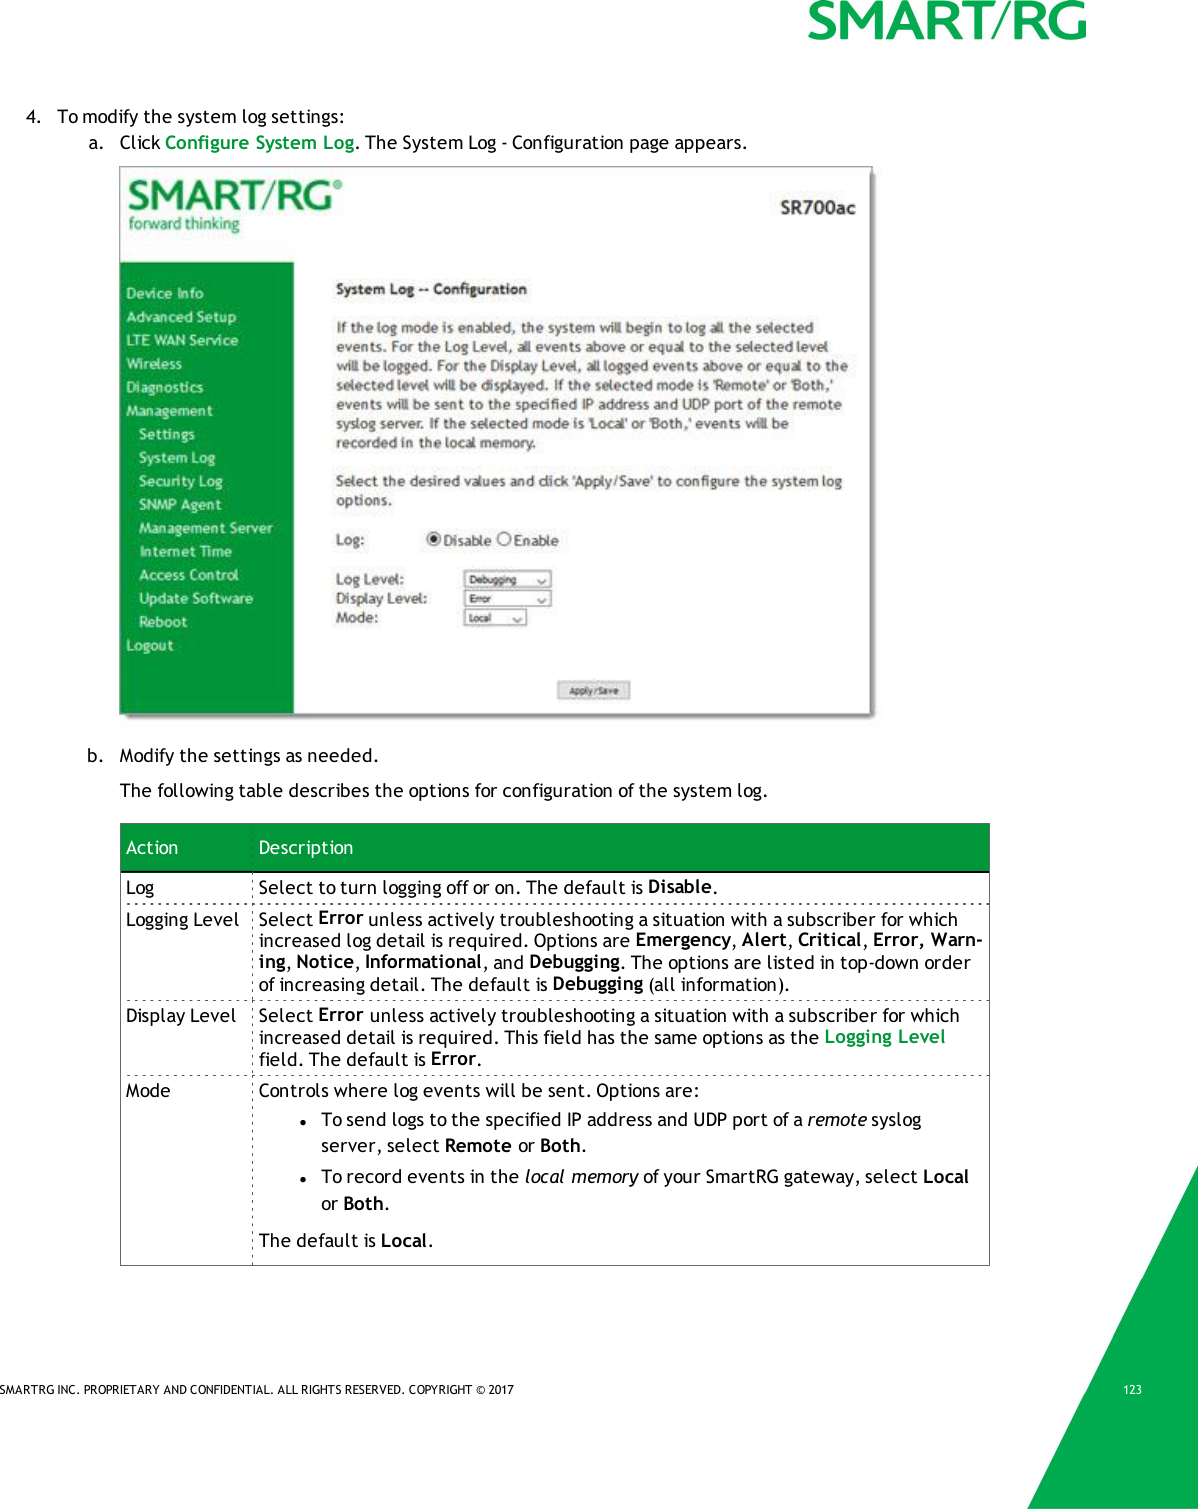 SMARTRG INC. PROPRIETARY AND CONFIDENTIAL. ALL RIGHTS RESERVED. COPYRIGHT © 2017 1234. To modify the system log settings:a. Click Configure System Log. The System Log - Configuration page appears.b. Modify the settings as needed.The following table describes the options for configuration of the system log.Action DescriptionLog Select to turn logging off or on. The default is Disable.Logging Level Select Error unless actively troubleshooting a situation with a subscriber for whichincreased log detail is required. Options are Emergency,Alert,Critical,Error, Warn-ing,Notice,Informational, and Debugging. The options are listed in top-down orderof increasing detail. The default is Debugging (all information).Display Level Select Error unless actively troubleshooting a situation with a subscriber for whichincreased detail is required. This field has the same options as the Logging Levelfield. The default is Error.Mode Controls where log events will be sent. Options are:lTo send logs to the specified IP address and UDP port of a remote syslogserver, select Remote or Both.lTo record events in the local memory of your SmartRG gateway, select Localor Both.The default is Local.